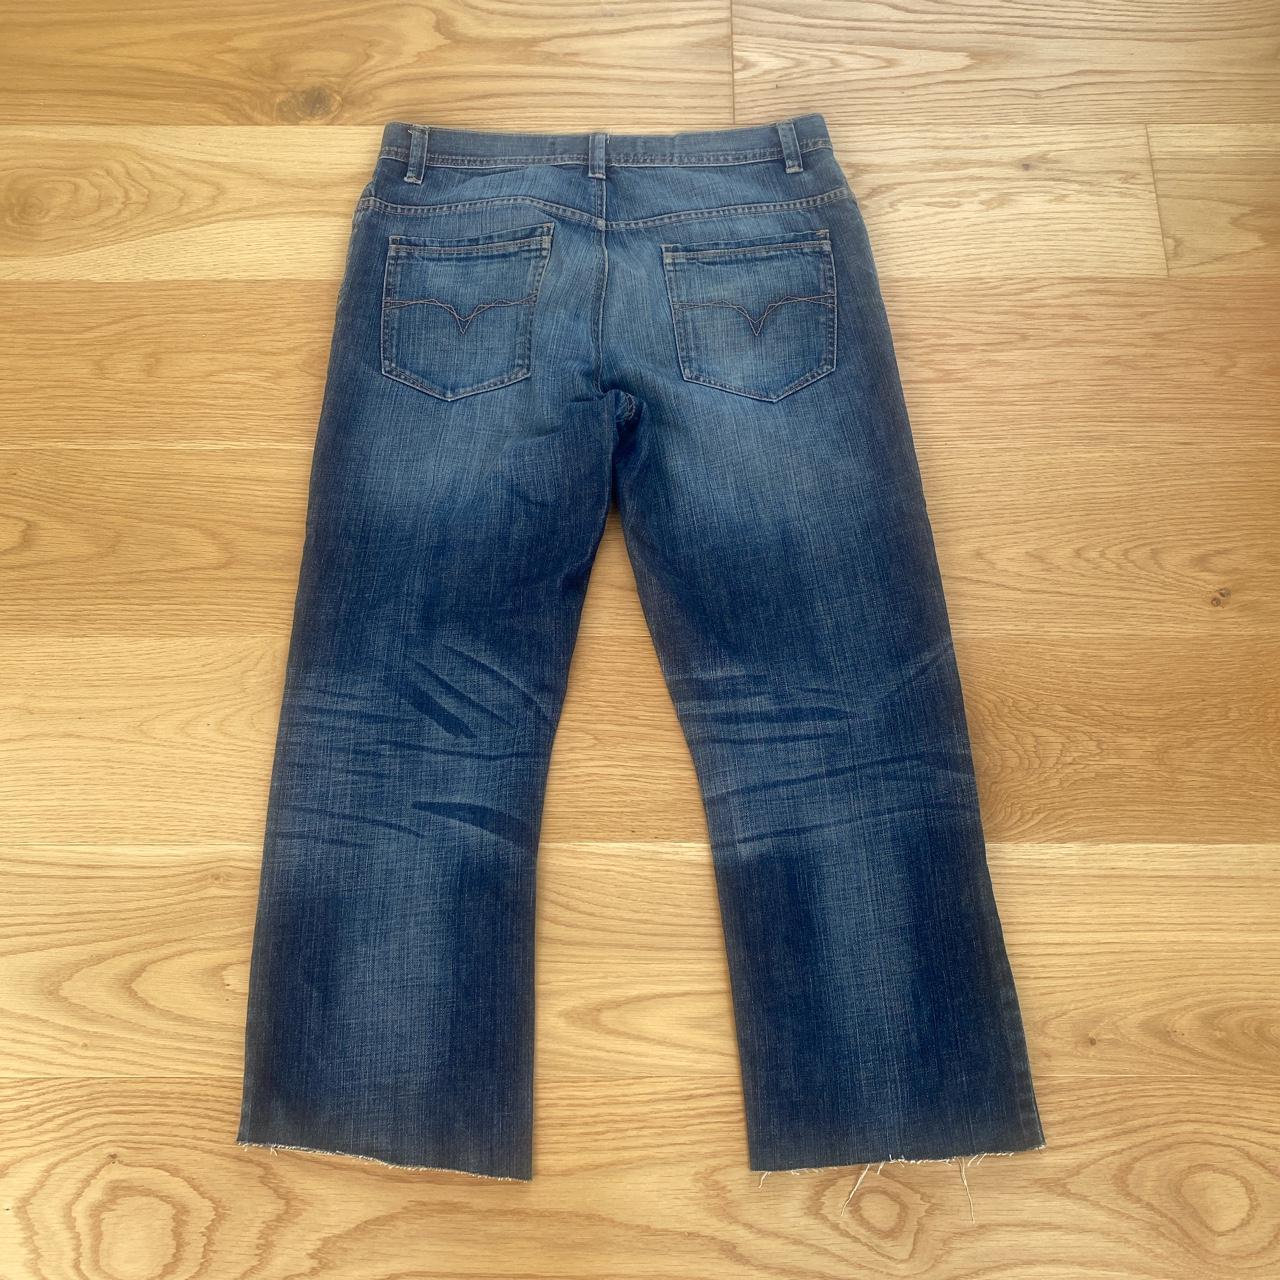 Baggy vintage jeans with nice 90s style fading,... - Depop